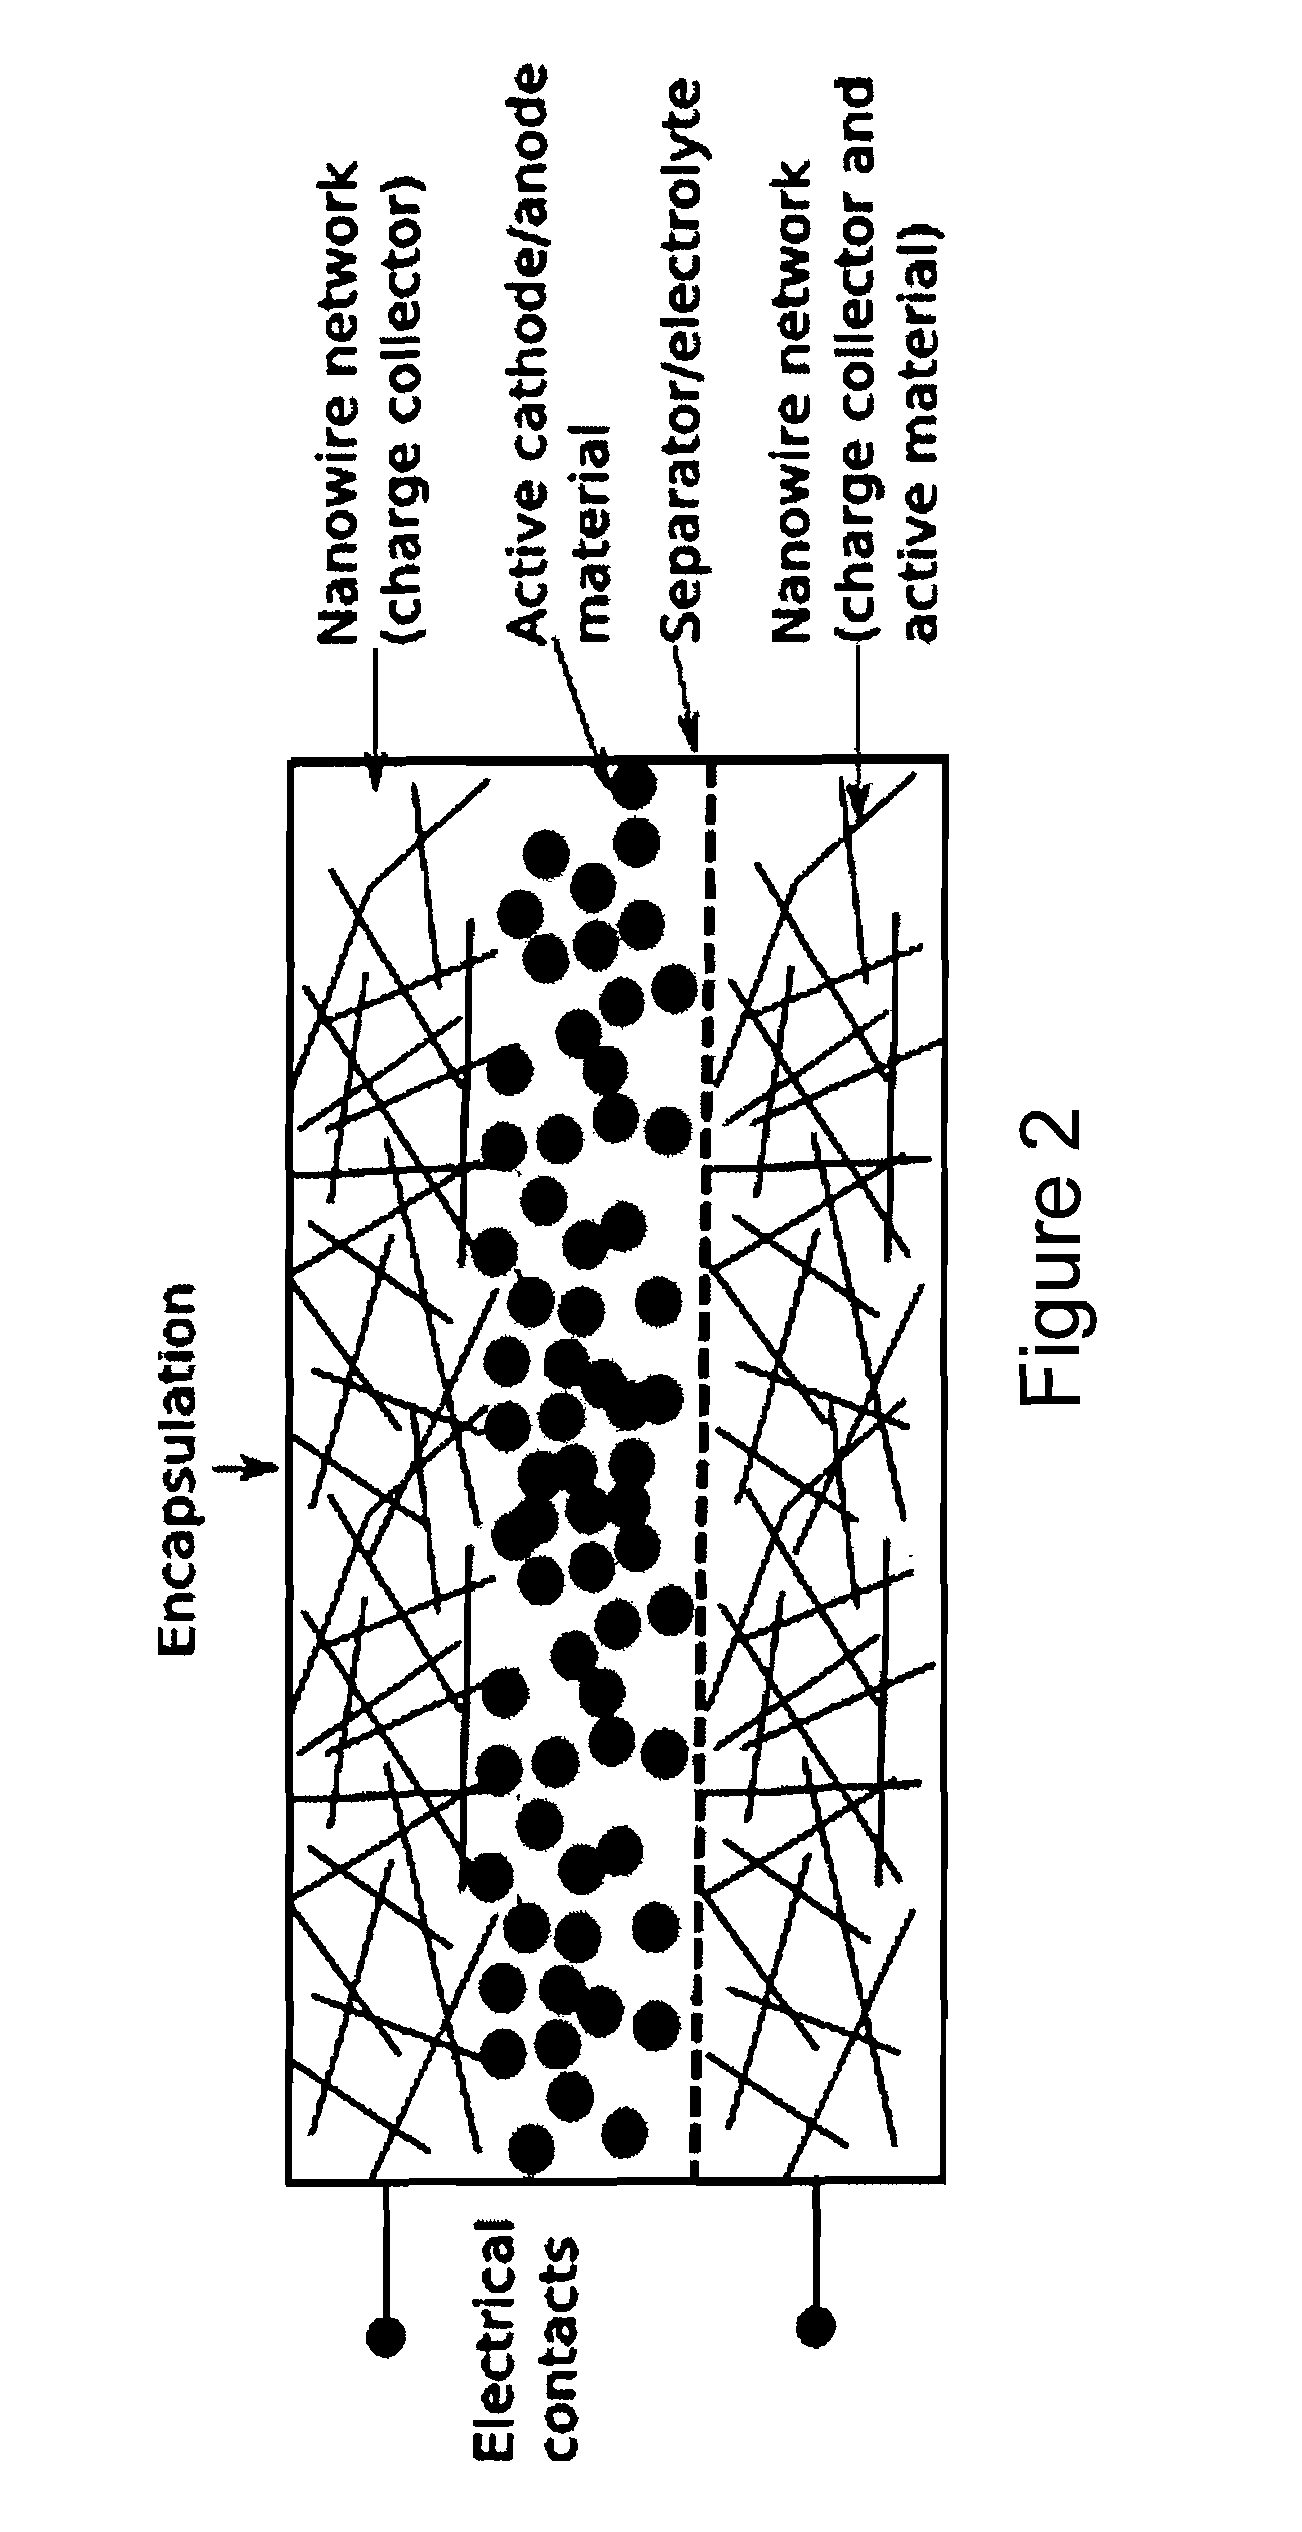 Charge storage devices containing carbon nanotube films as electrodes and charge collectors